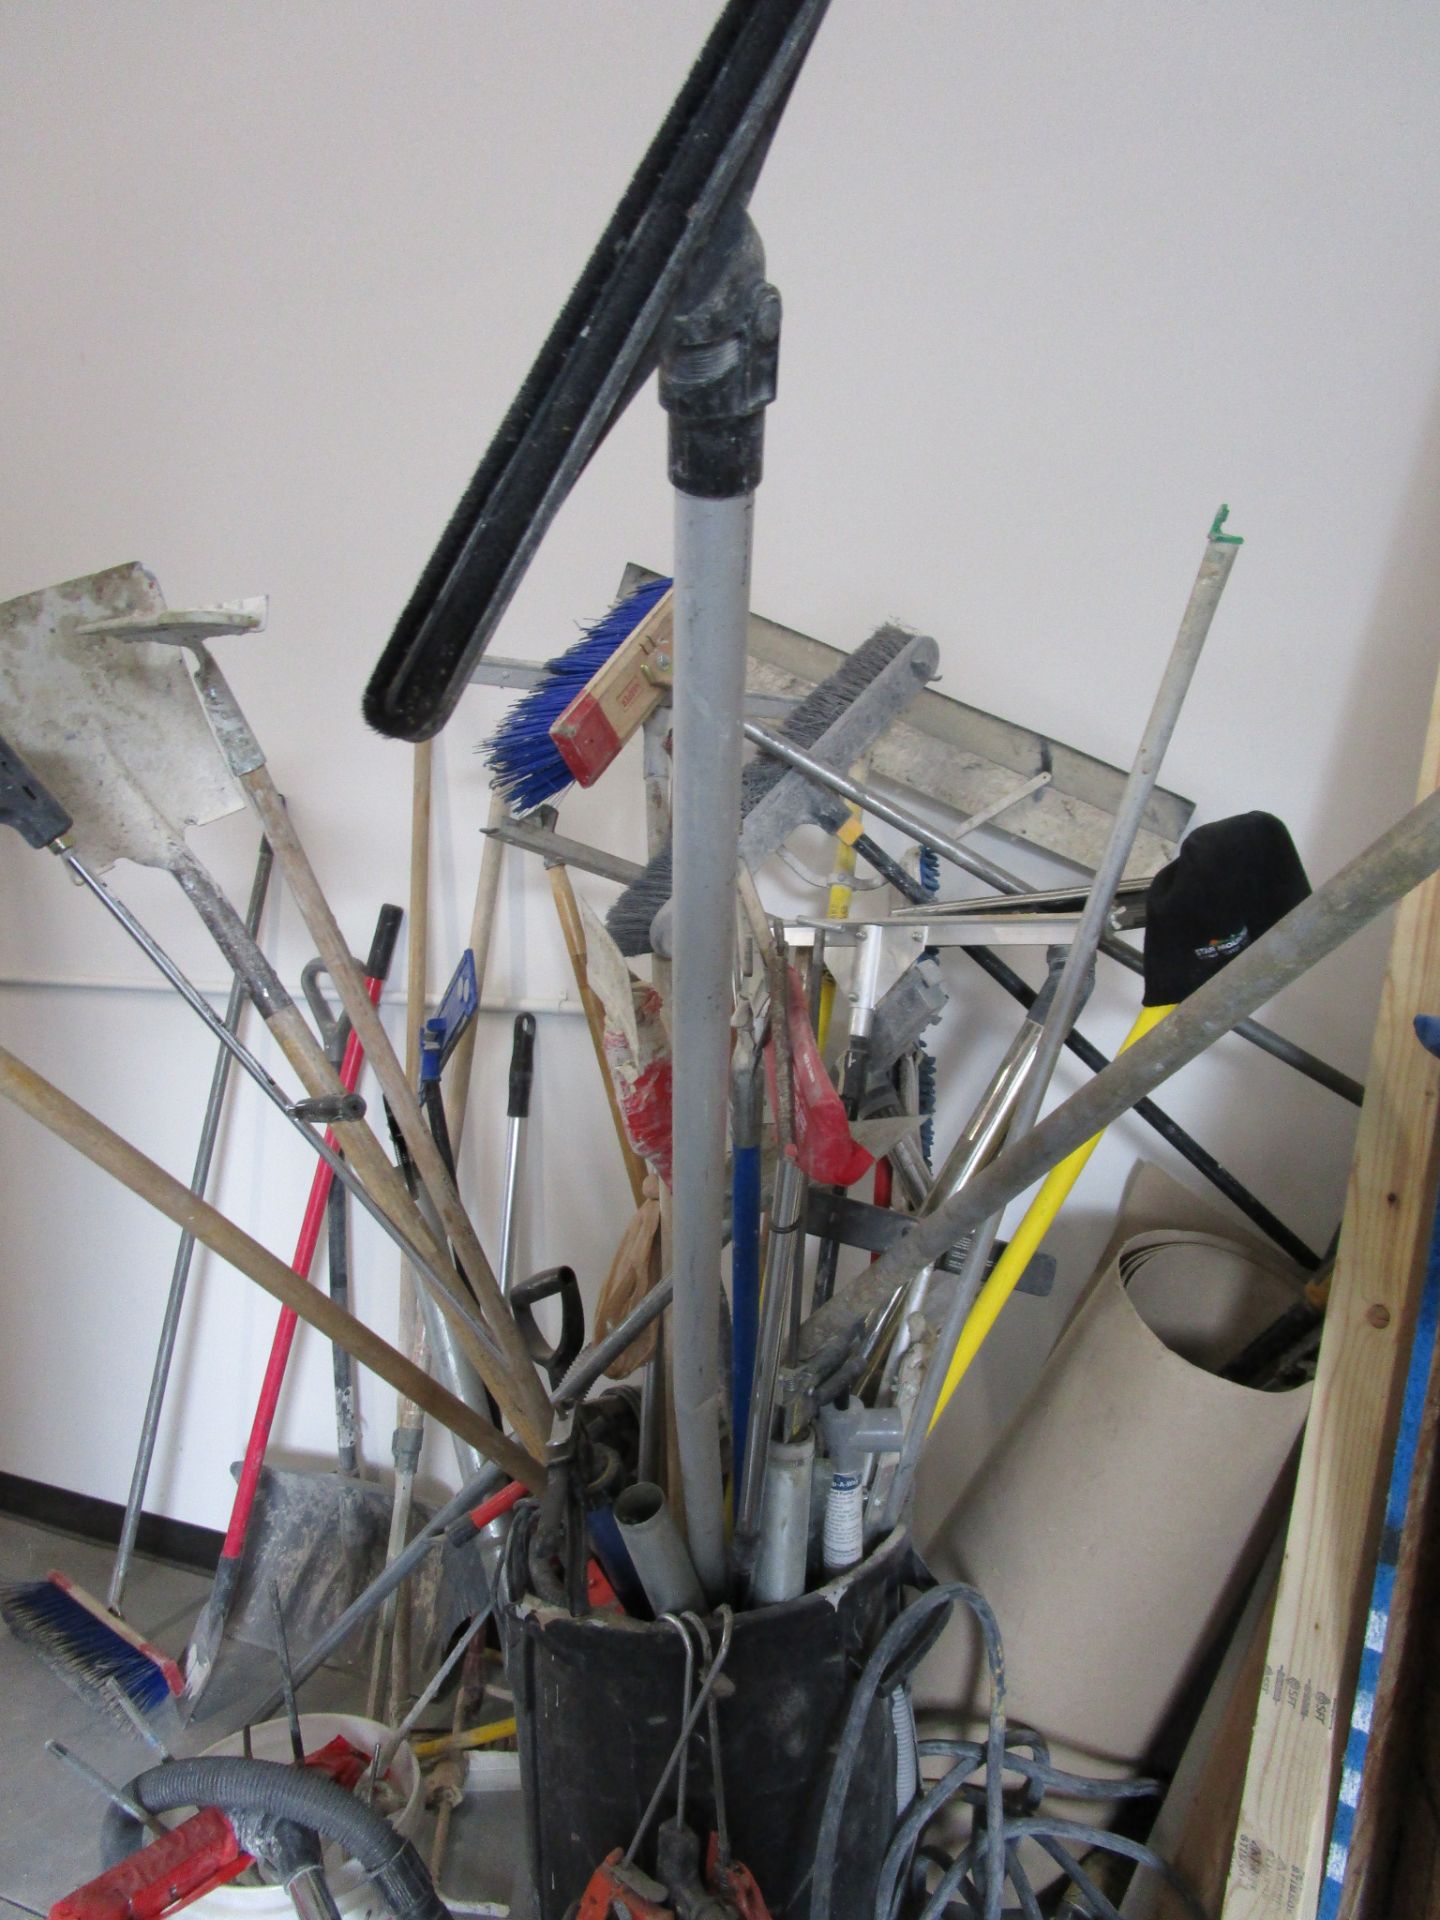 Lot Of Hose, Brooms, Tools, Etc. - Image 4 of 4